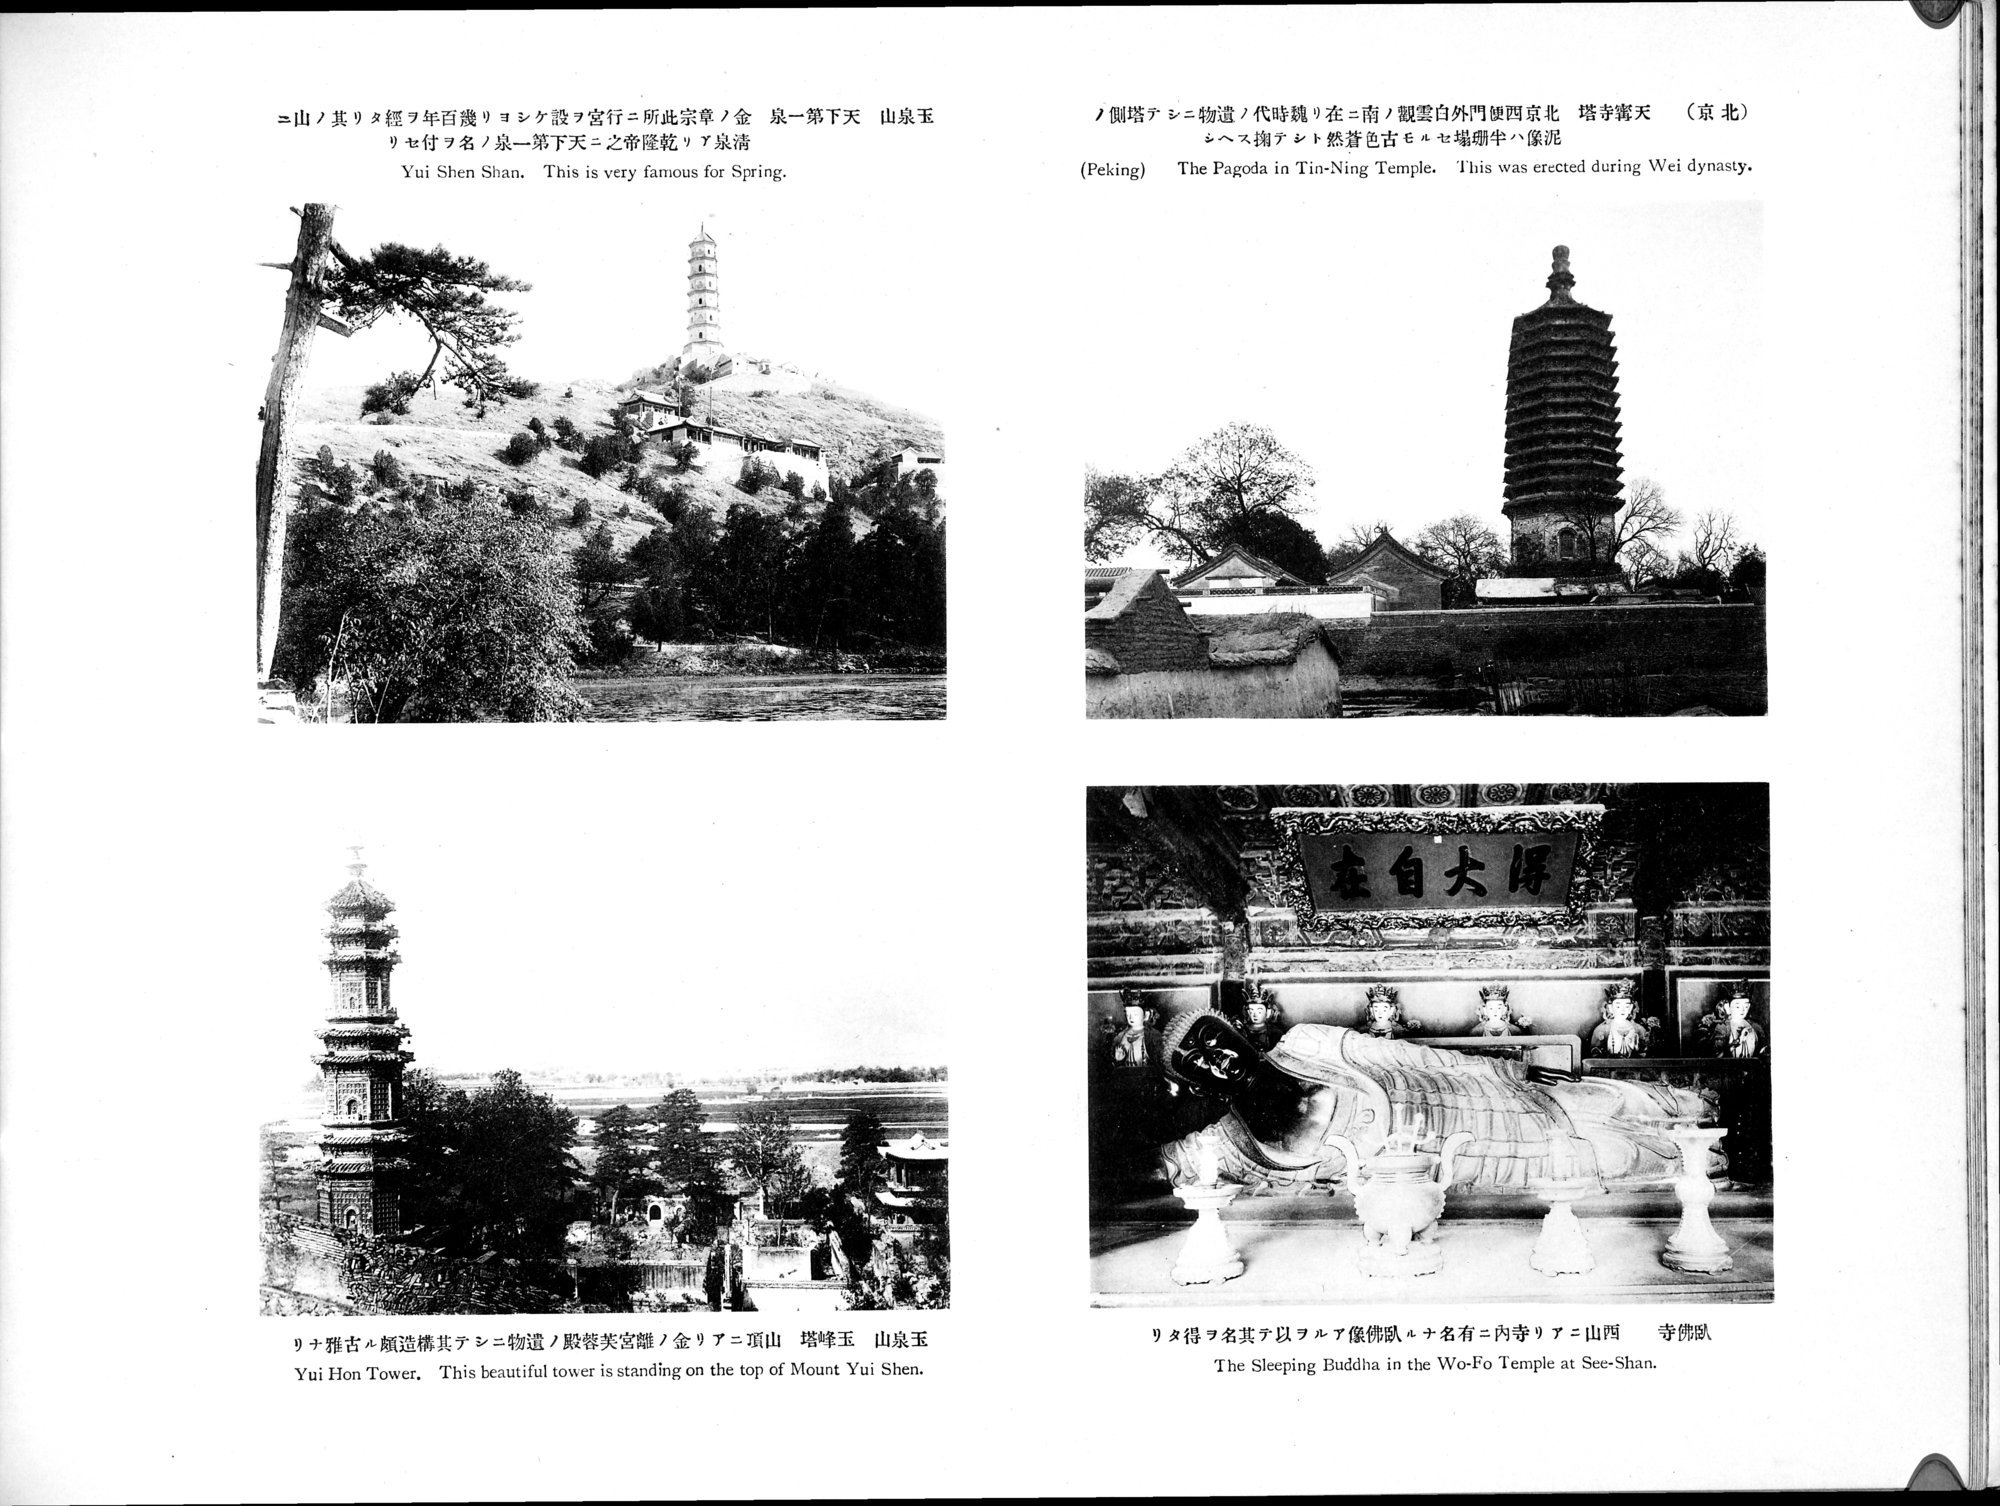 Views and Custom of North China : vol.1 / Page 183 (Grayscale High Resolution Image)